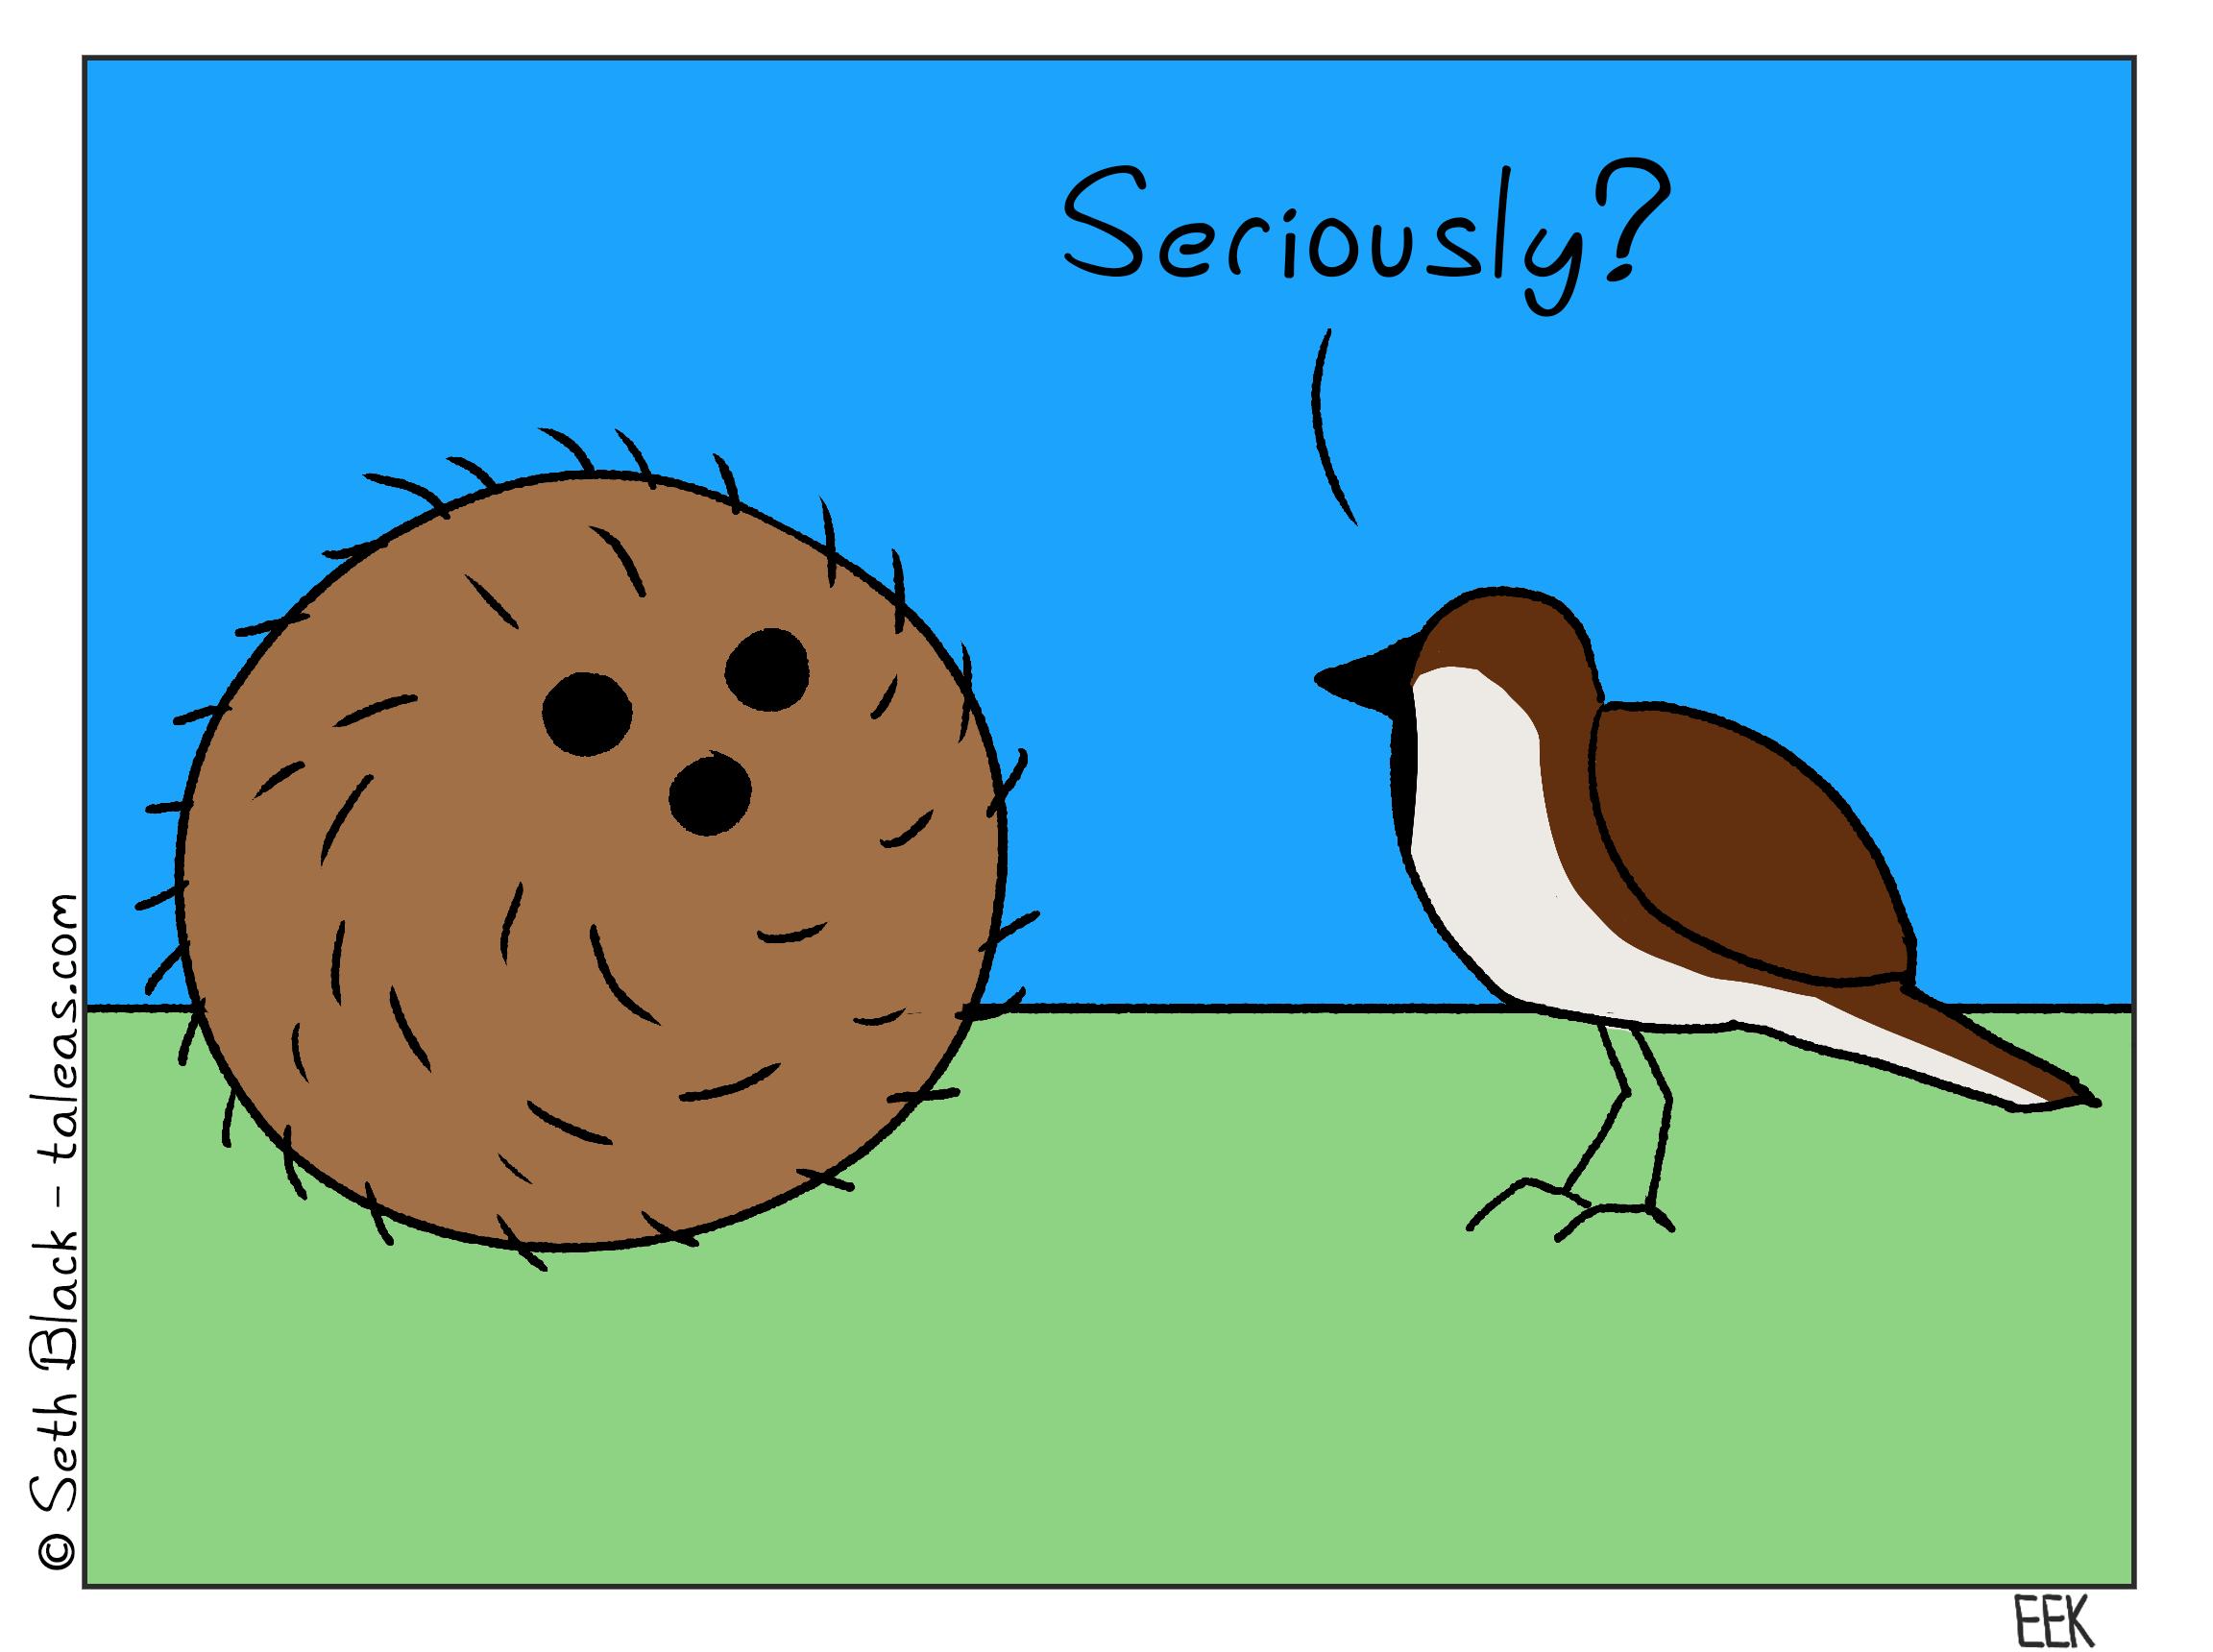 A swallow looks at a coconut and asks, "Seriously?"